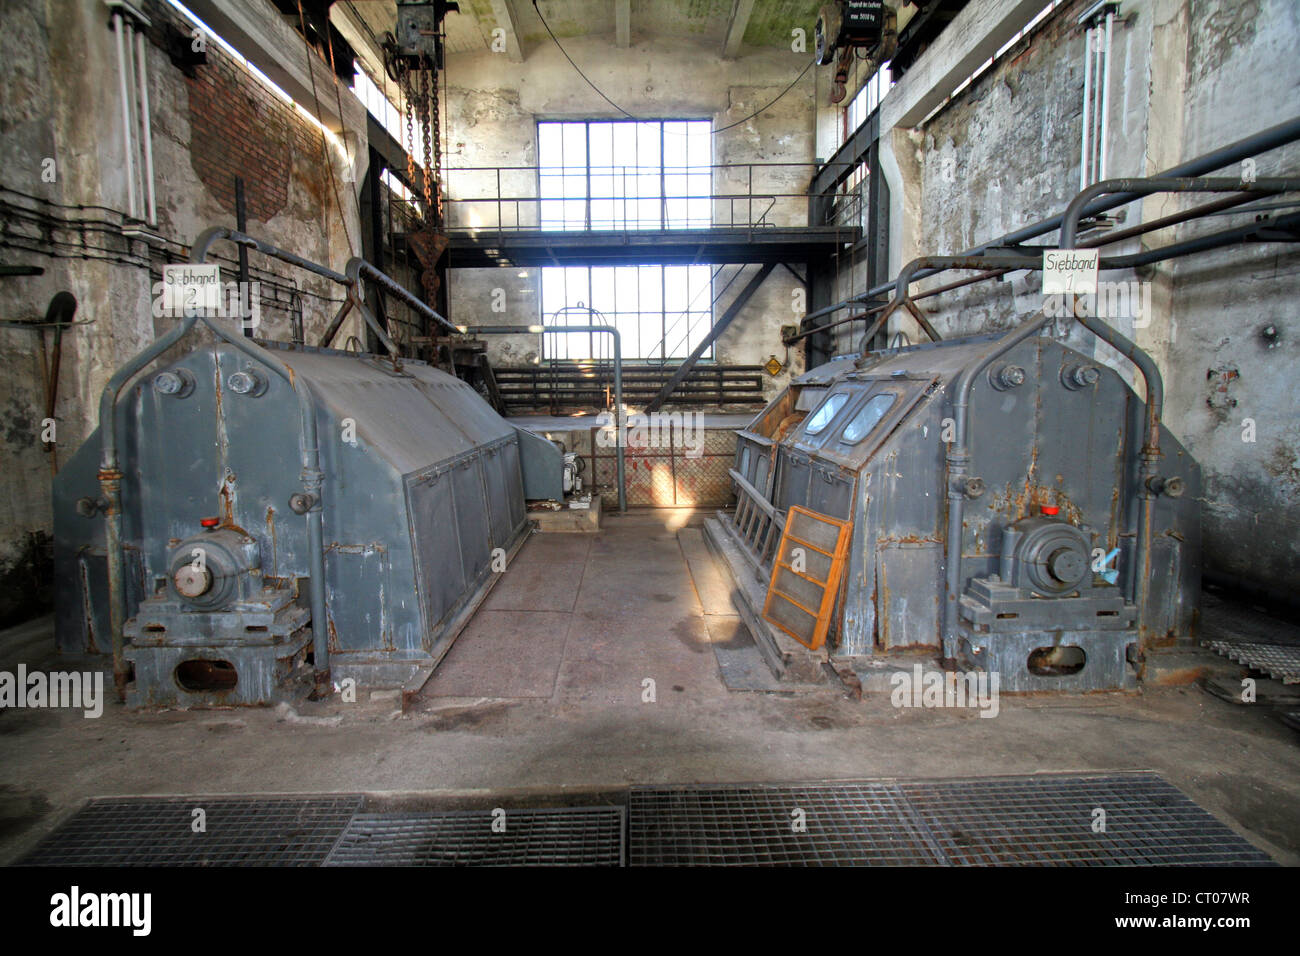 Machinery at an old WW2 missile factory in Peenemunde, Germany Stock Photo